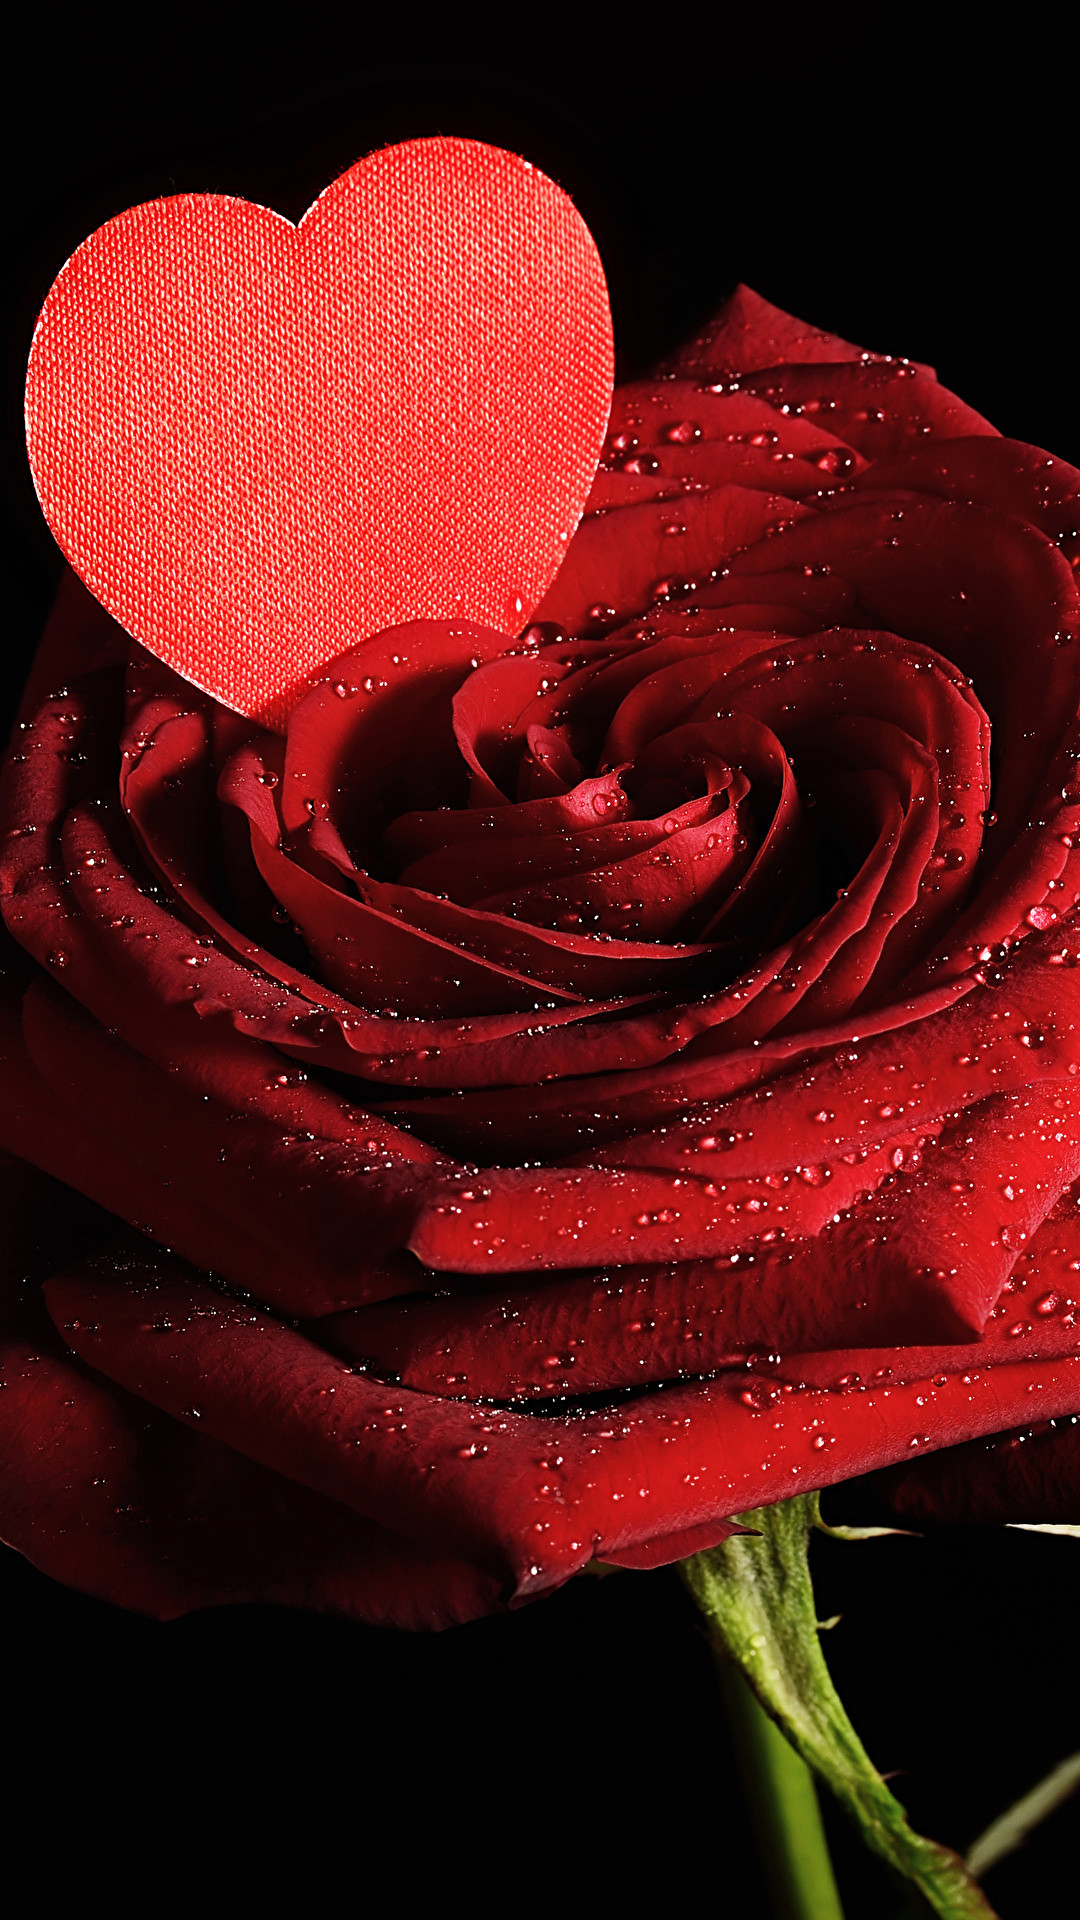 1080x1920 Wallpapers Valentine's Day Heart Red Roses Drops Flowers Black background  